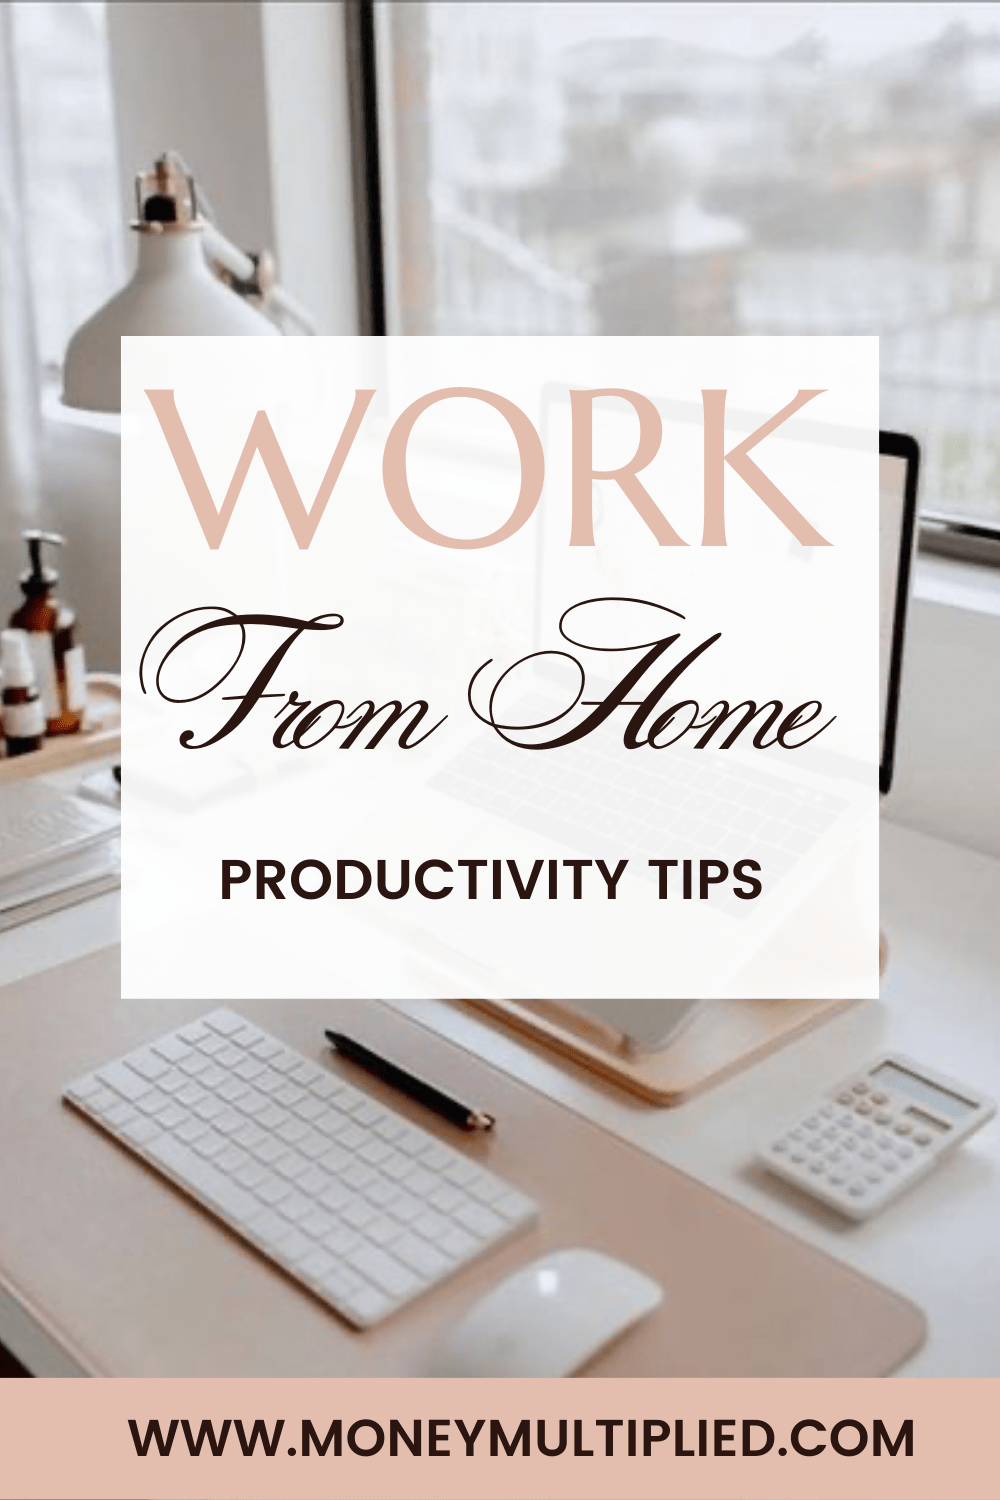 Work from home productivity tips
